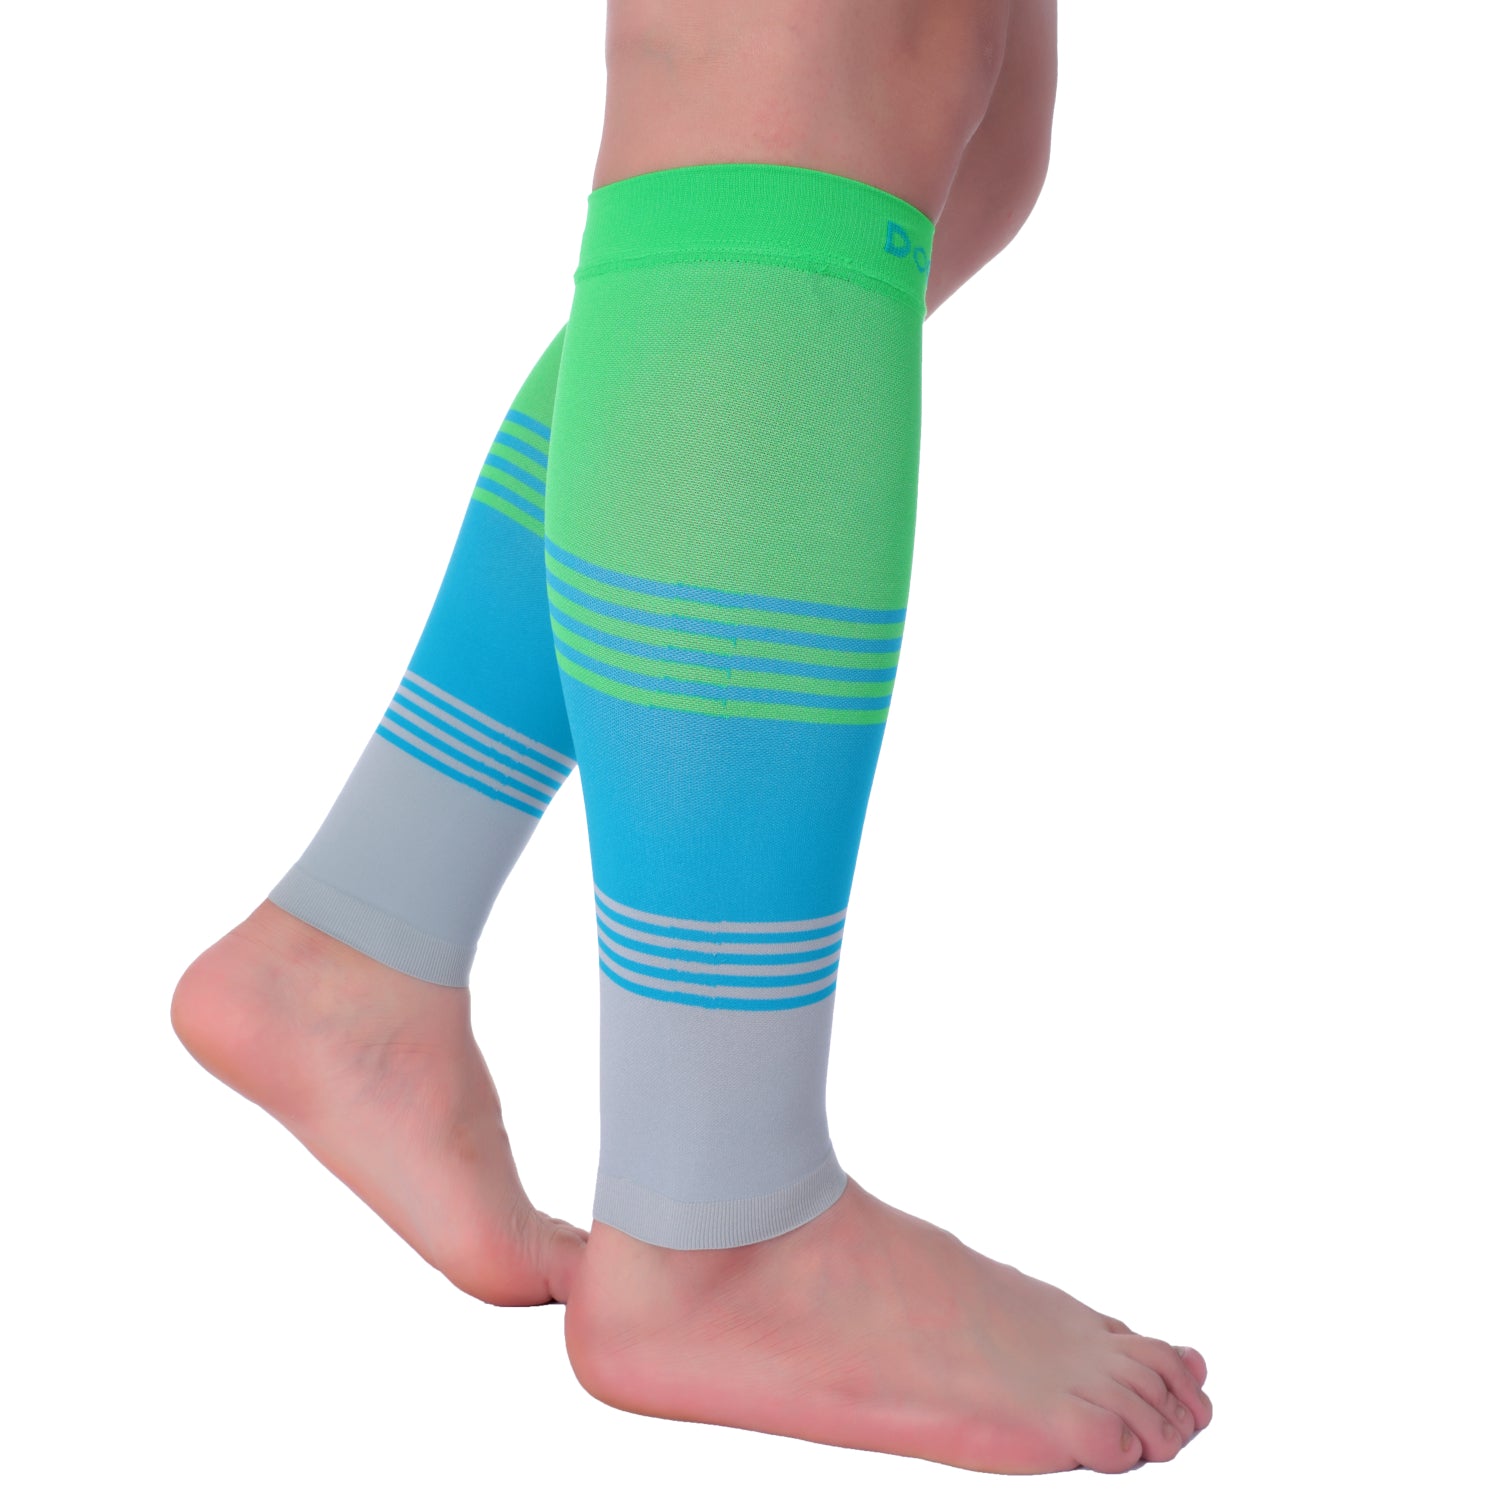 Premium Calf Compression Sleeve 20-30 mmHg GREEN/BLUE/GRAY by Doc Mill ...